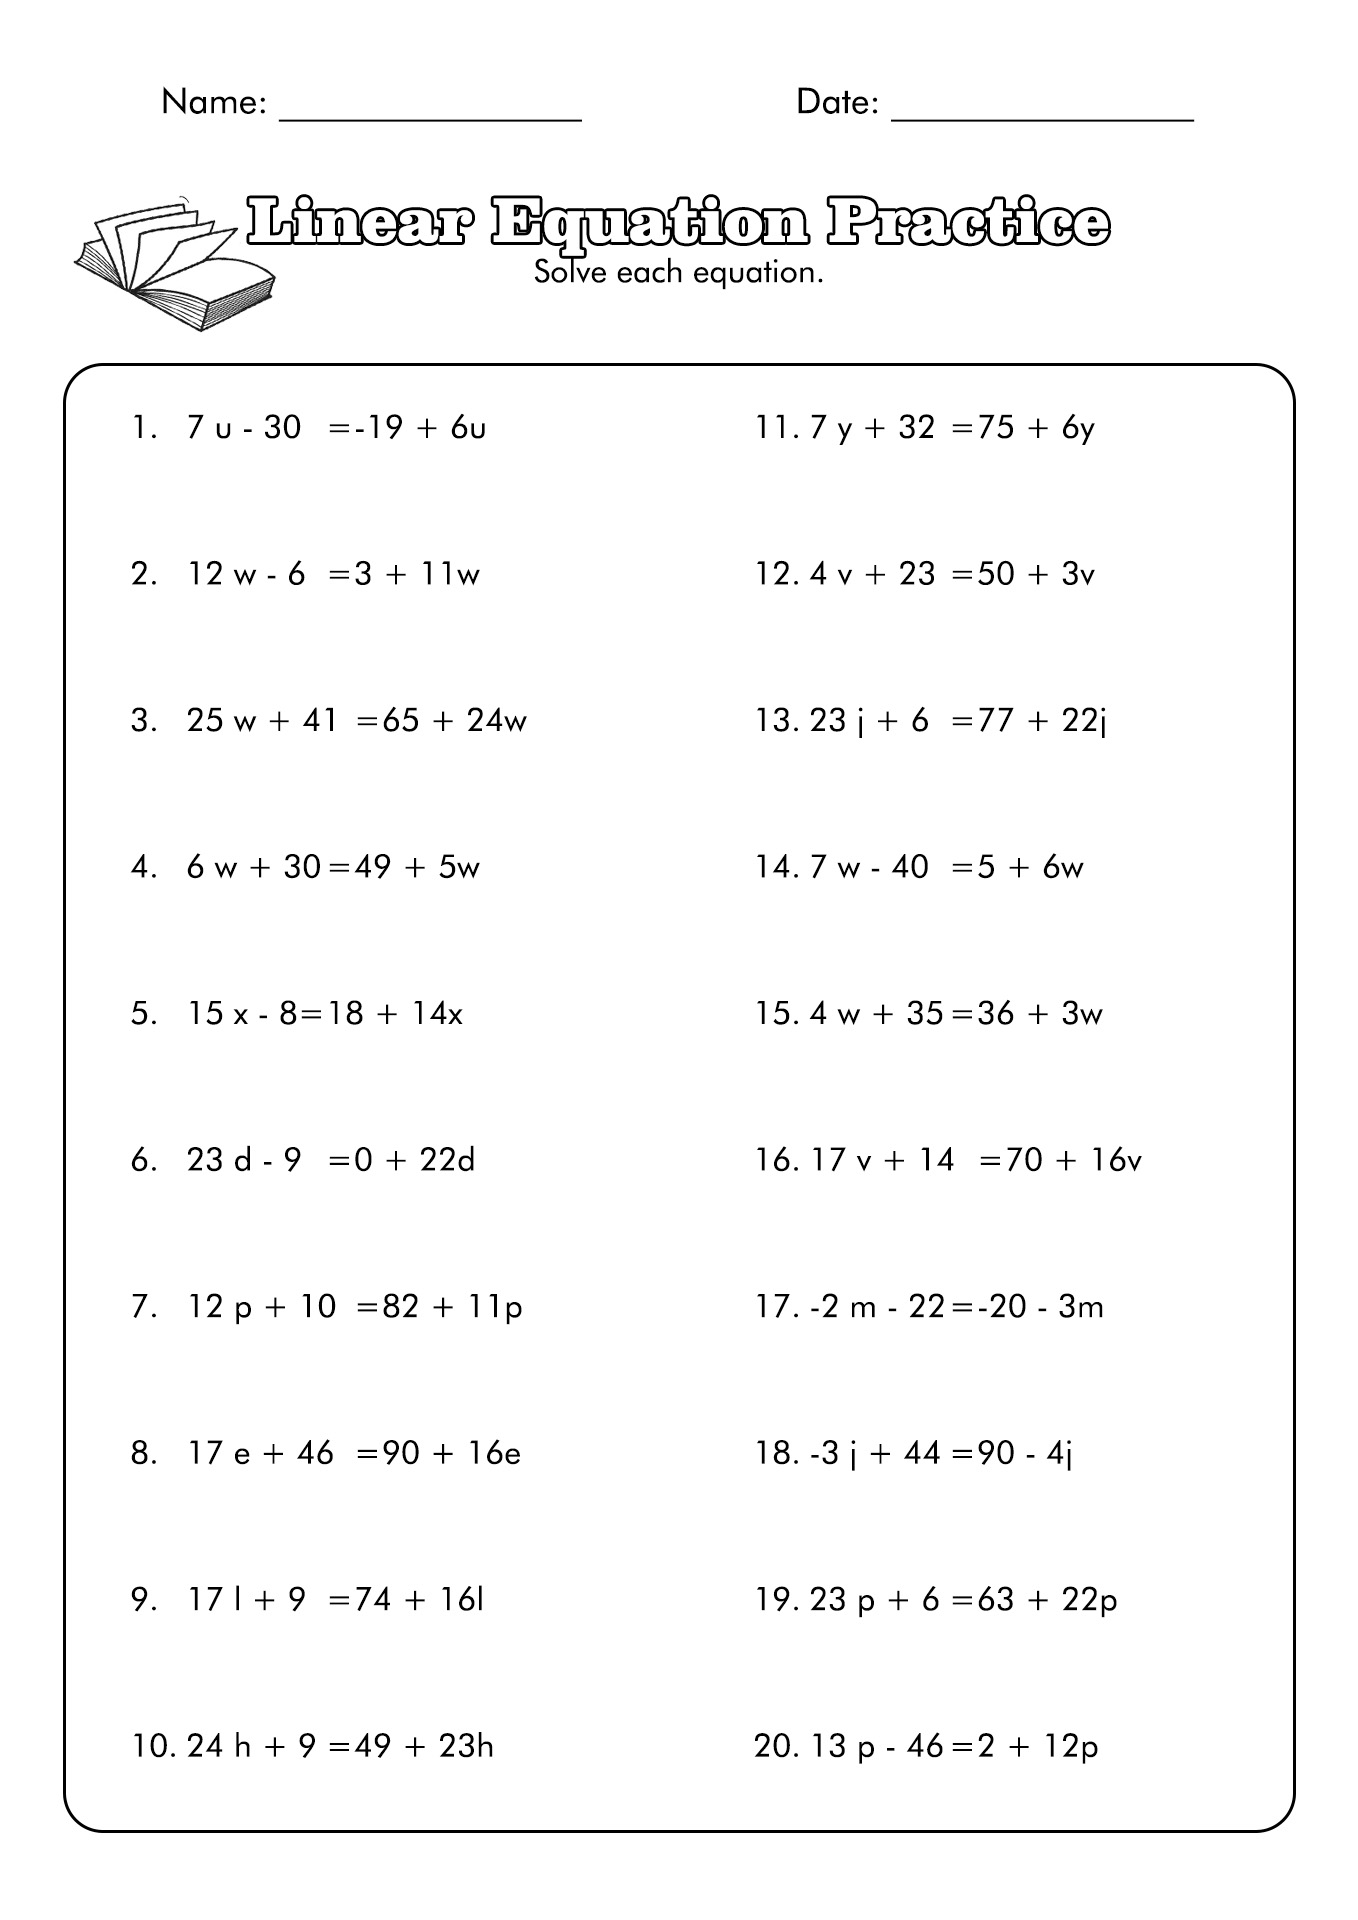 Linear Equations Practice Problems